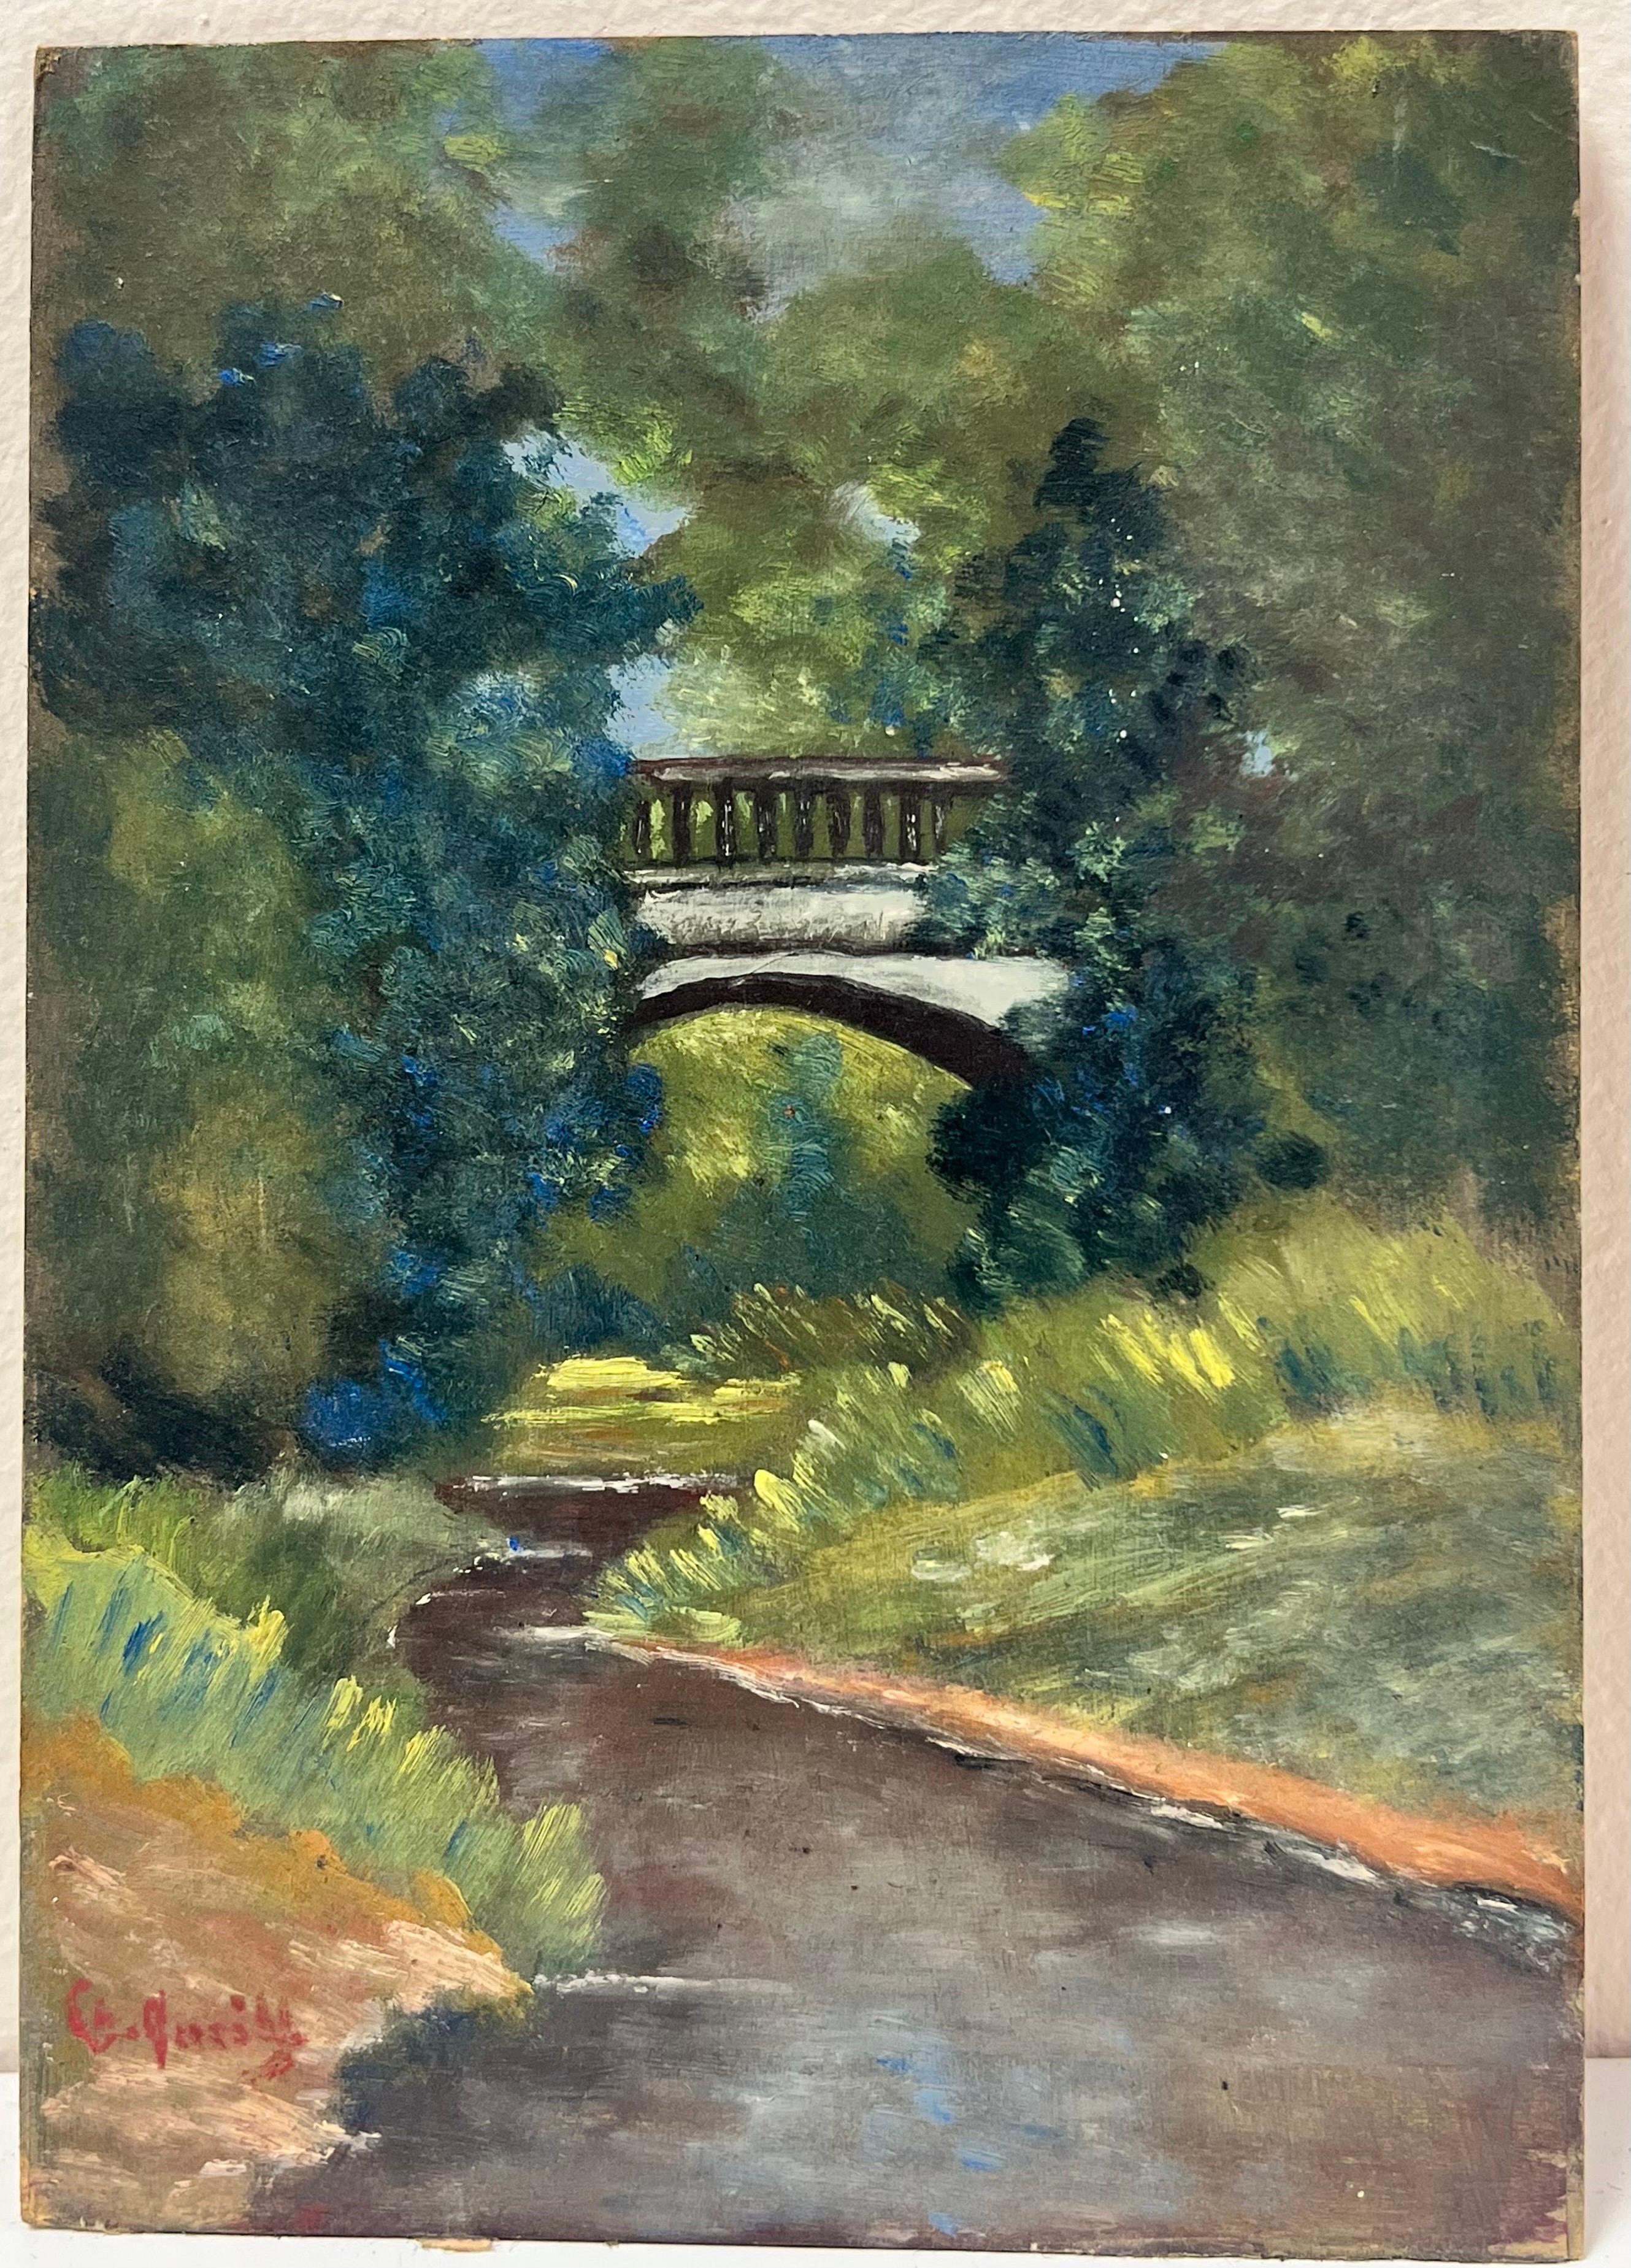 The Bridge over the River
French School, early 20th century
signed oil on board, unframed
board: 7.25 x 5 inches
provenance: private collection
condition: very good and sound condition  